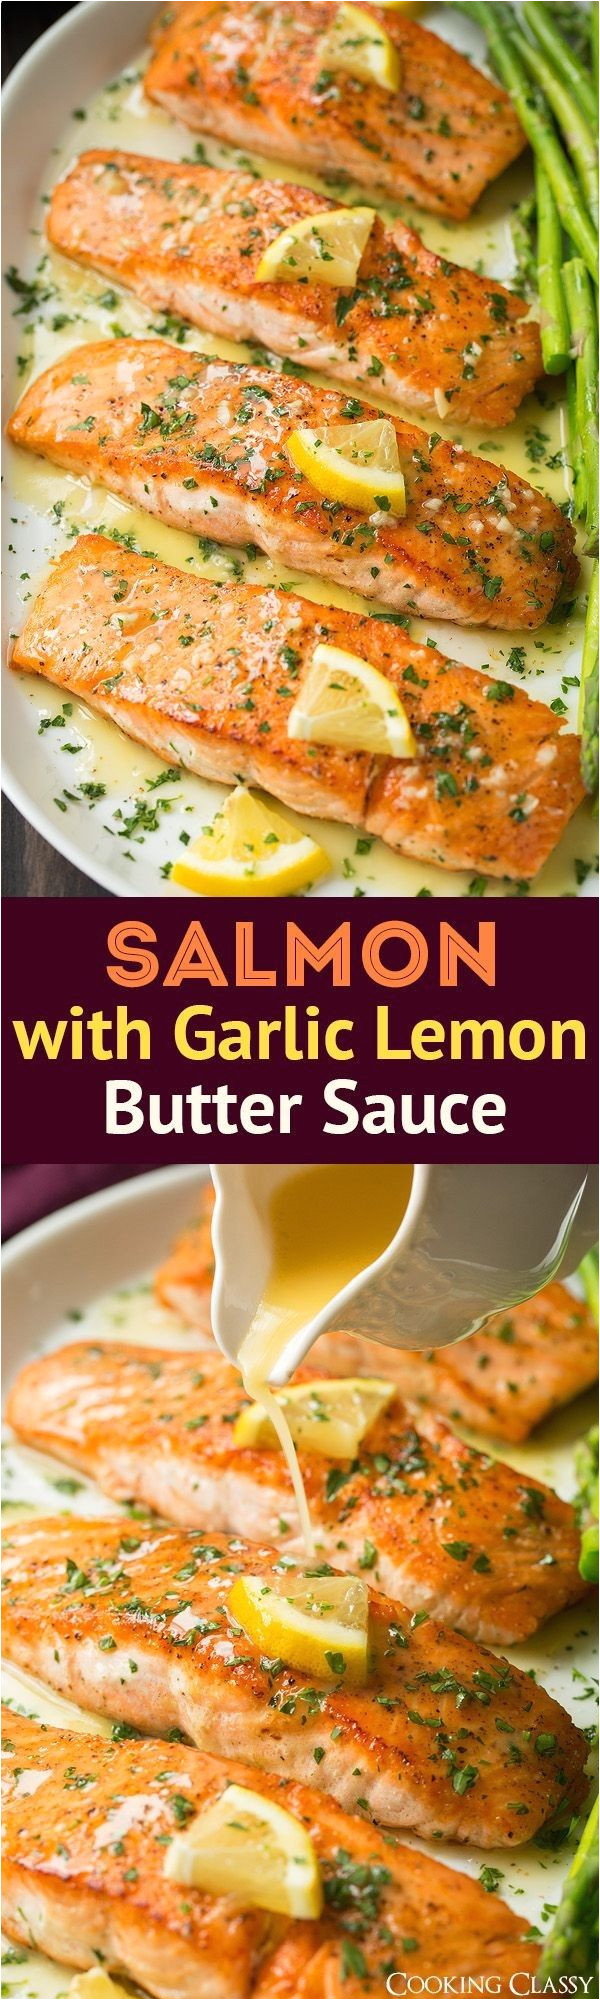 skillet seared salmon with garlic lemon butter sauce cooking classy